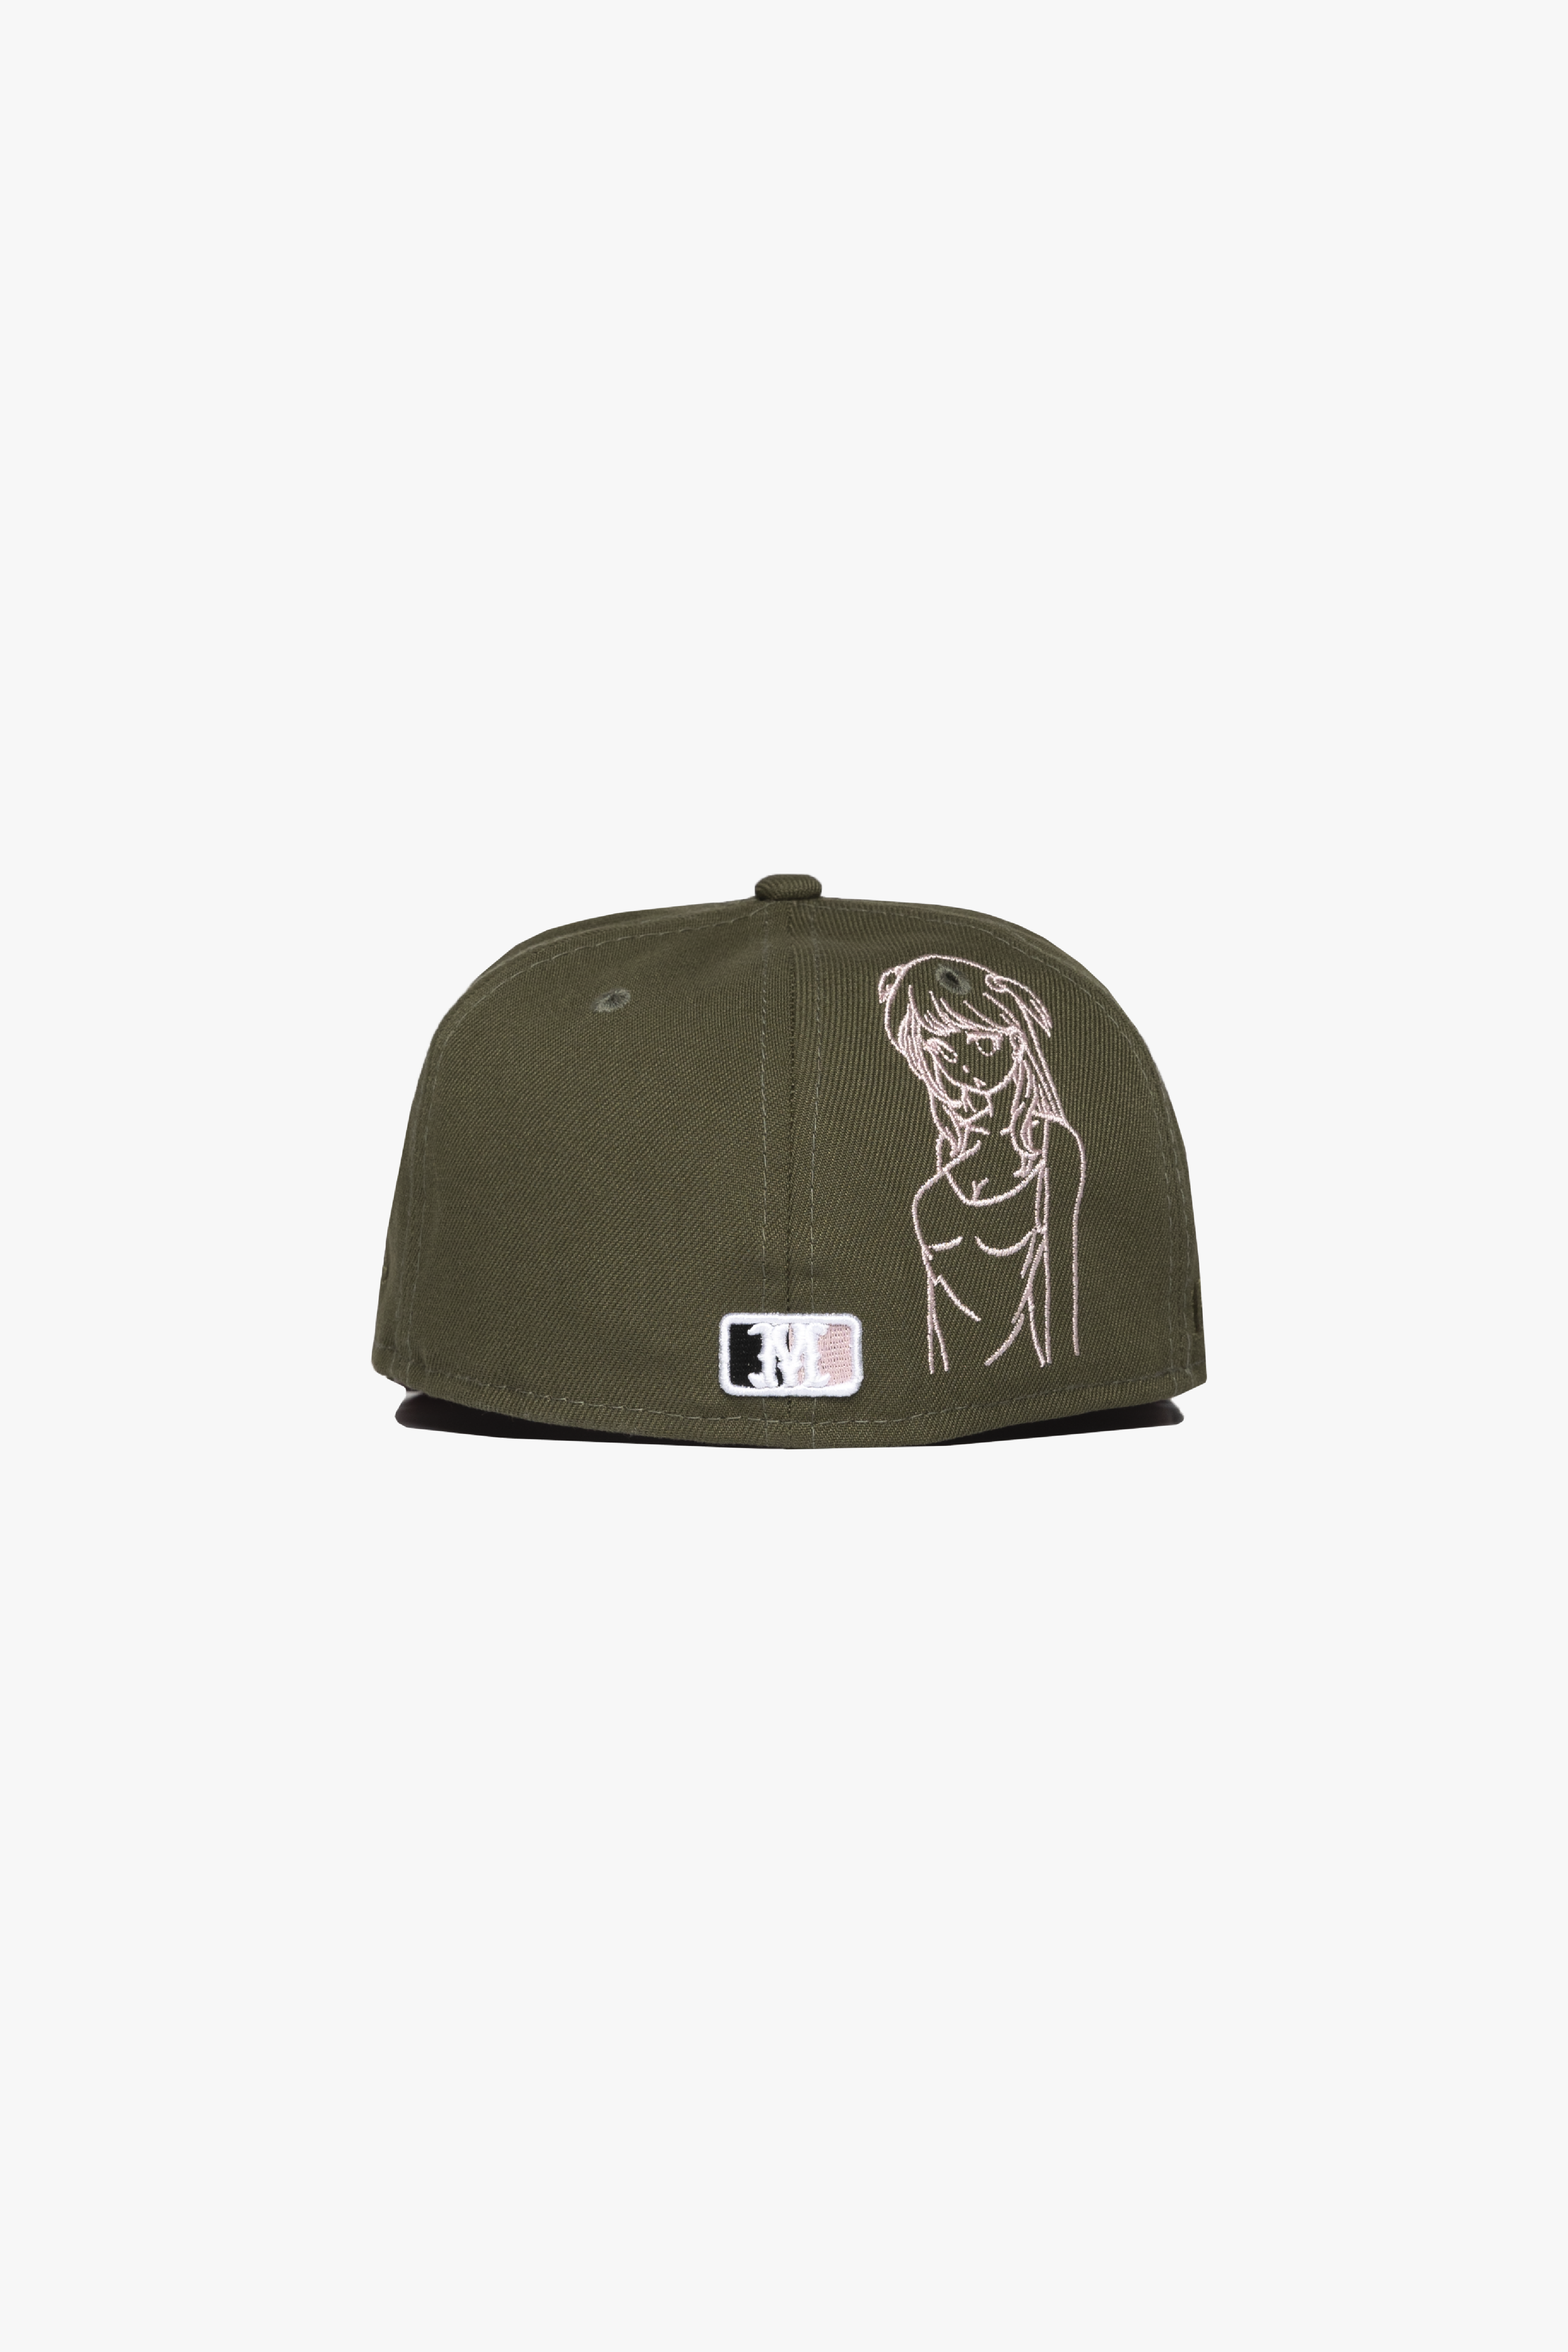 OLIVE MEWT NEW ERA 59FIFTY FITTED